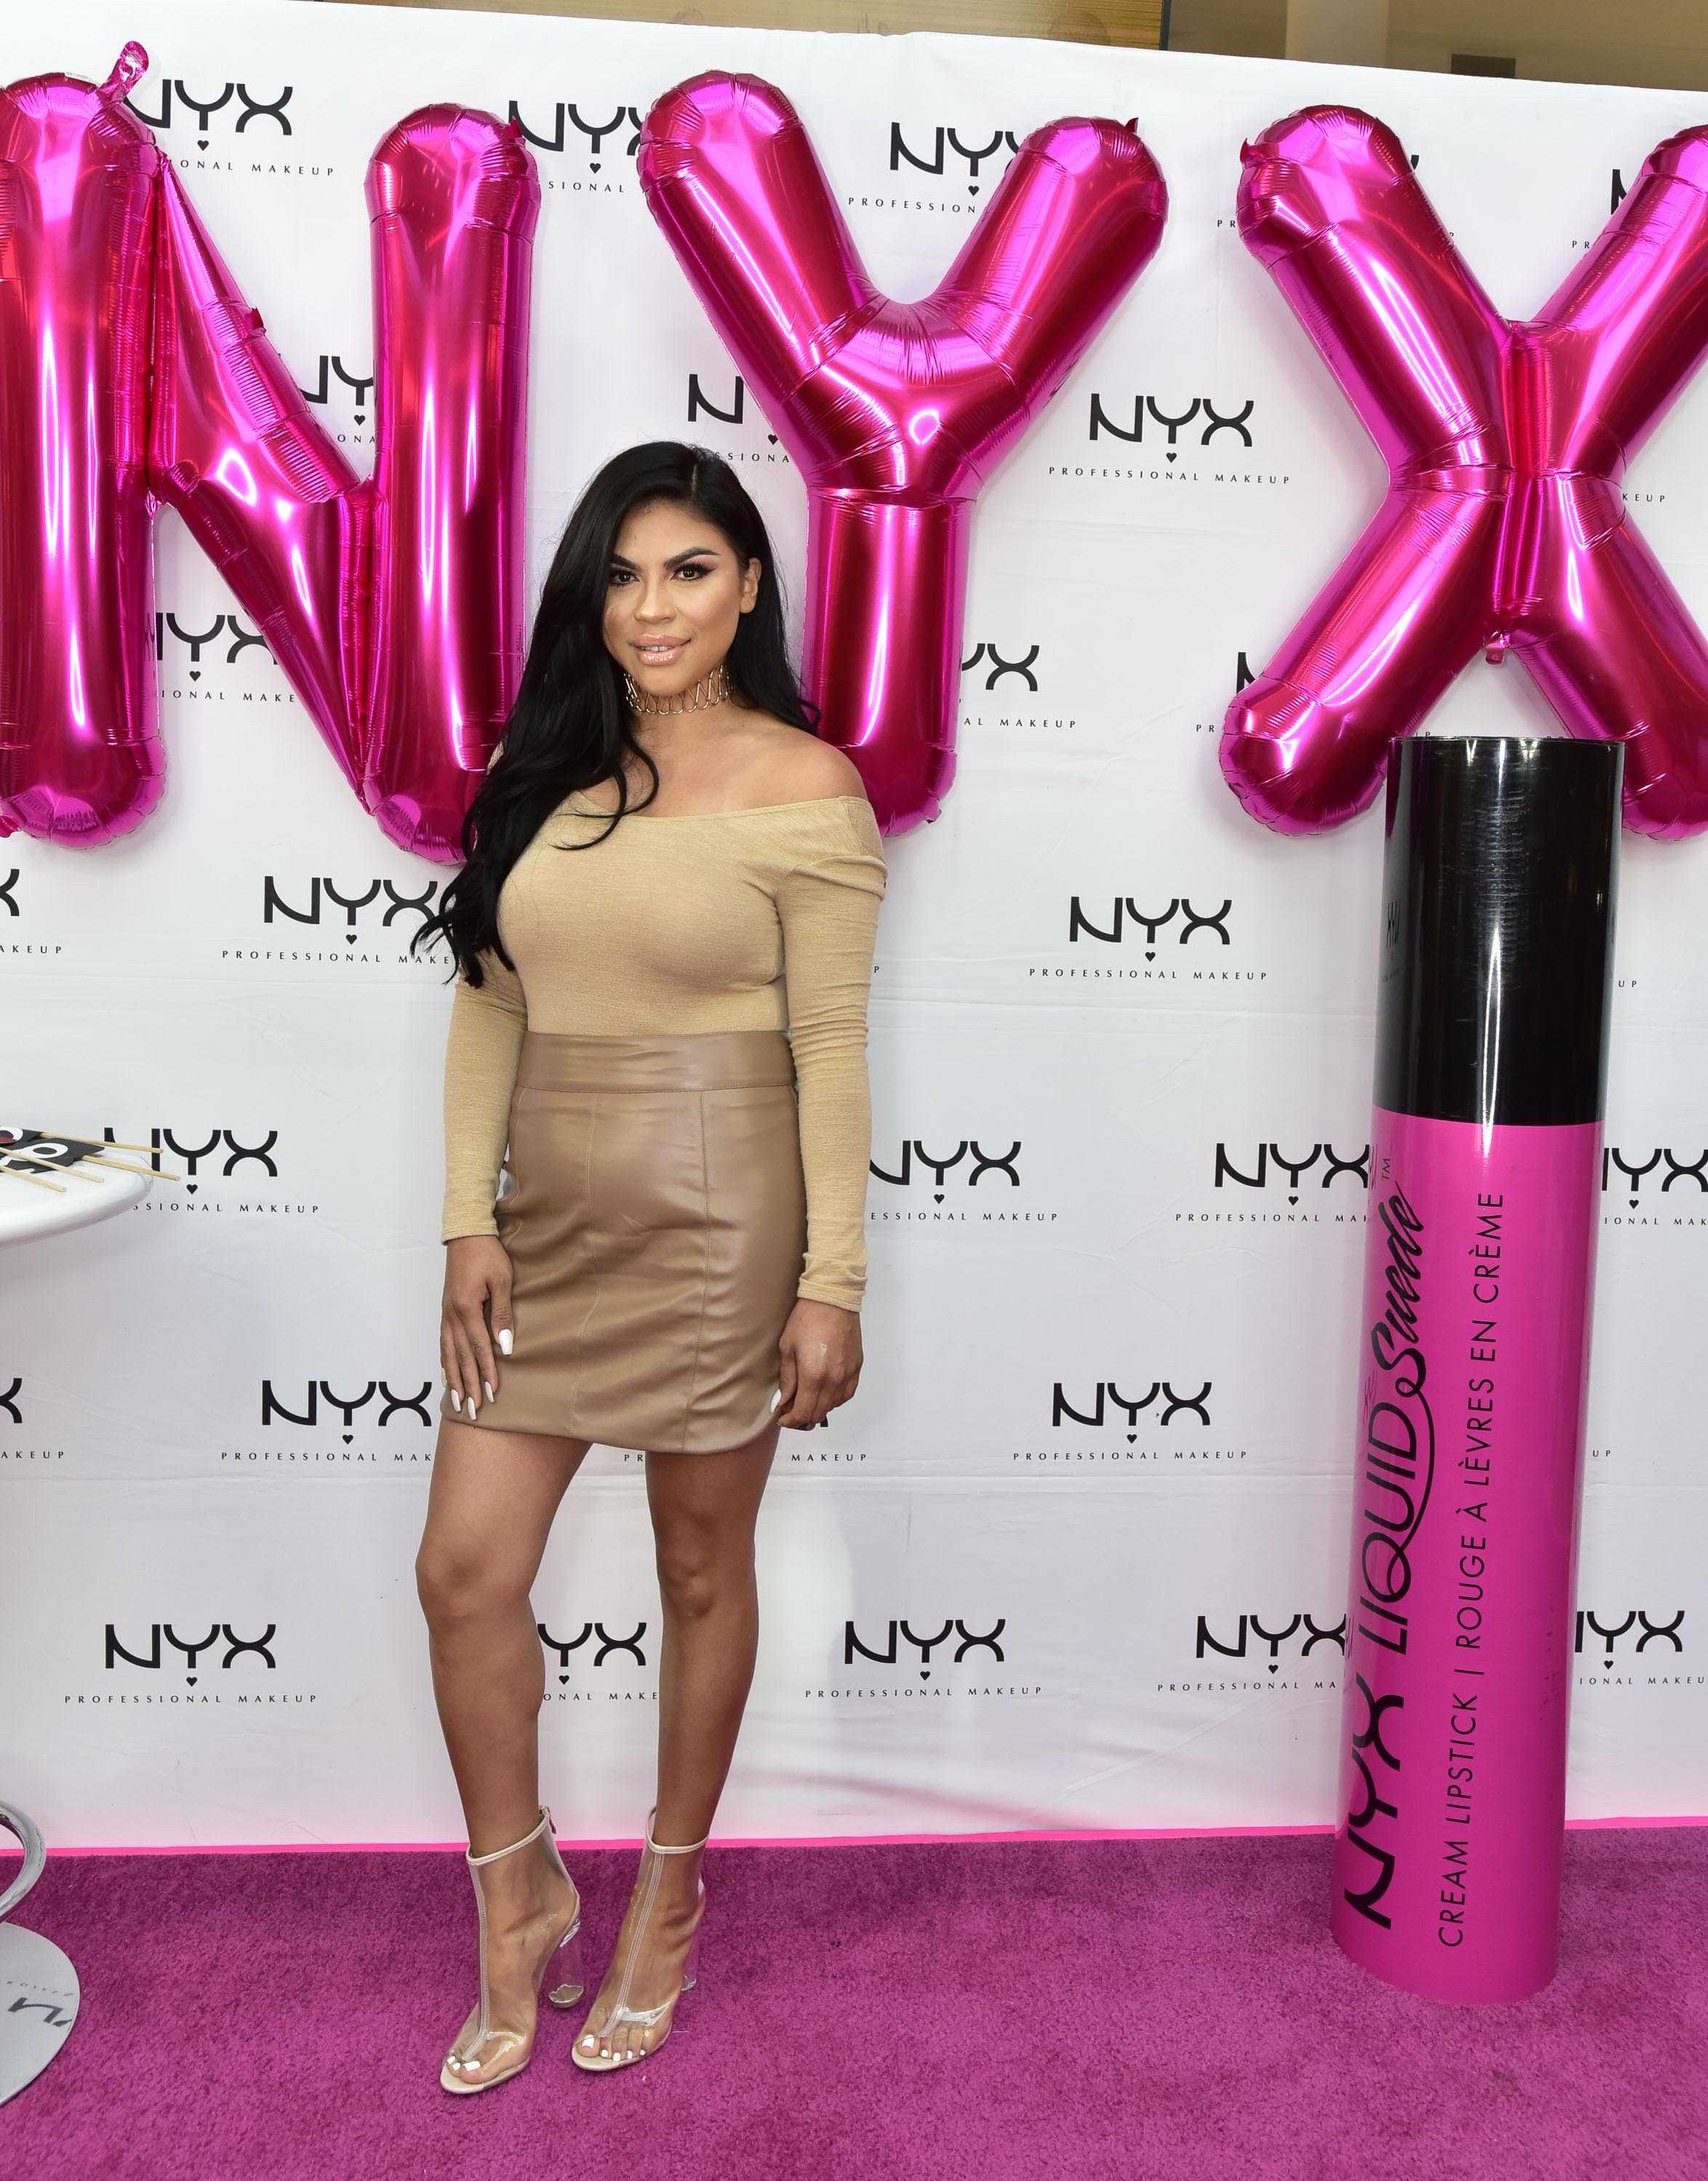 Griselda Martinez attends the NYX Professional Makeup Store